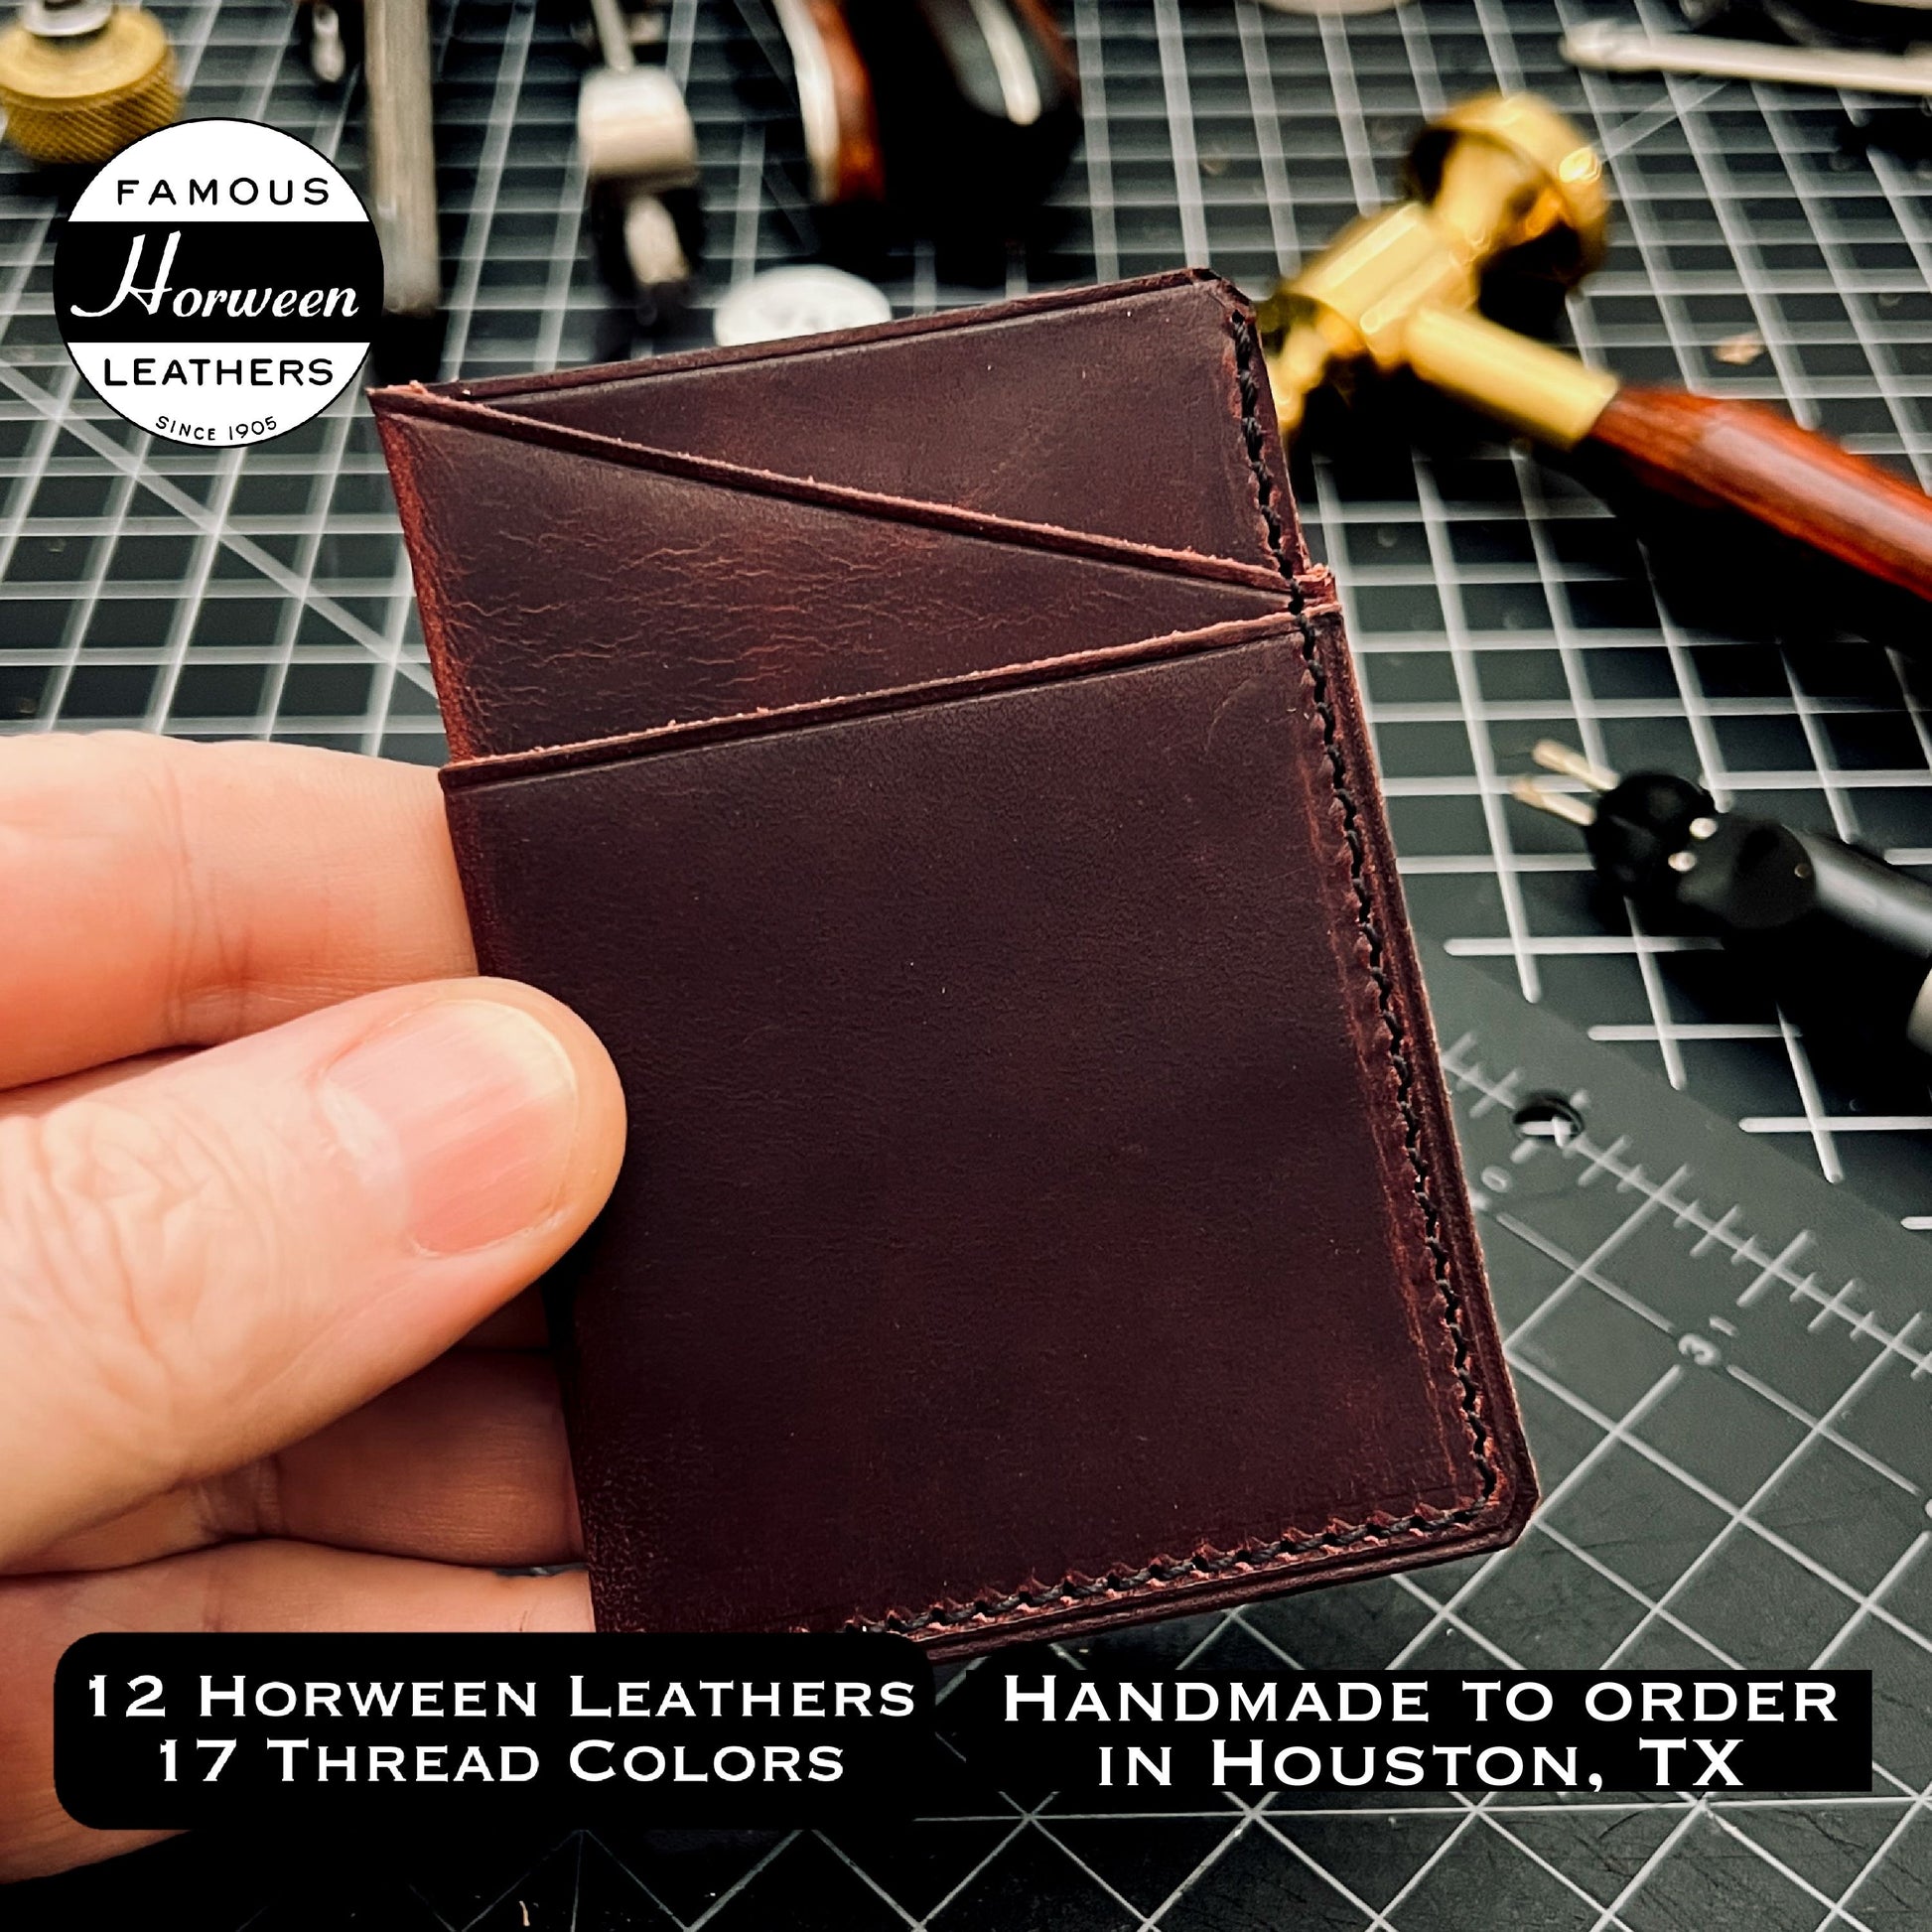 Color 8 Horween Leather Custom EDC3 Minimalist Wallet | Handmade Compact EDC Small Mini Wallet by Custom Leather and Pen in Houston, TX